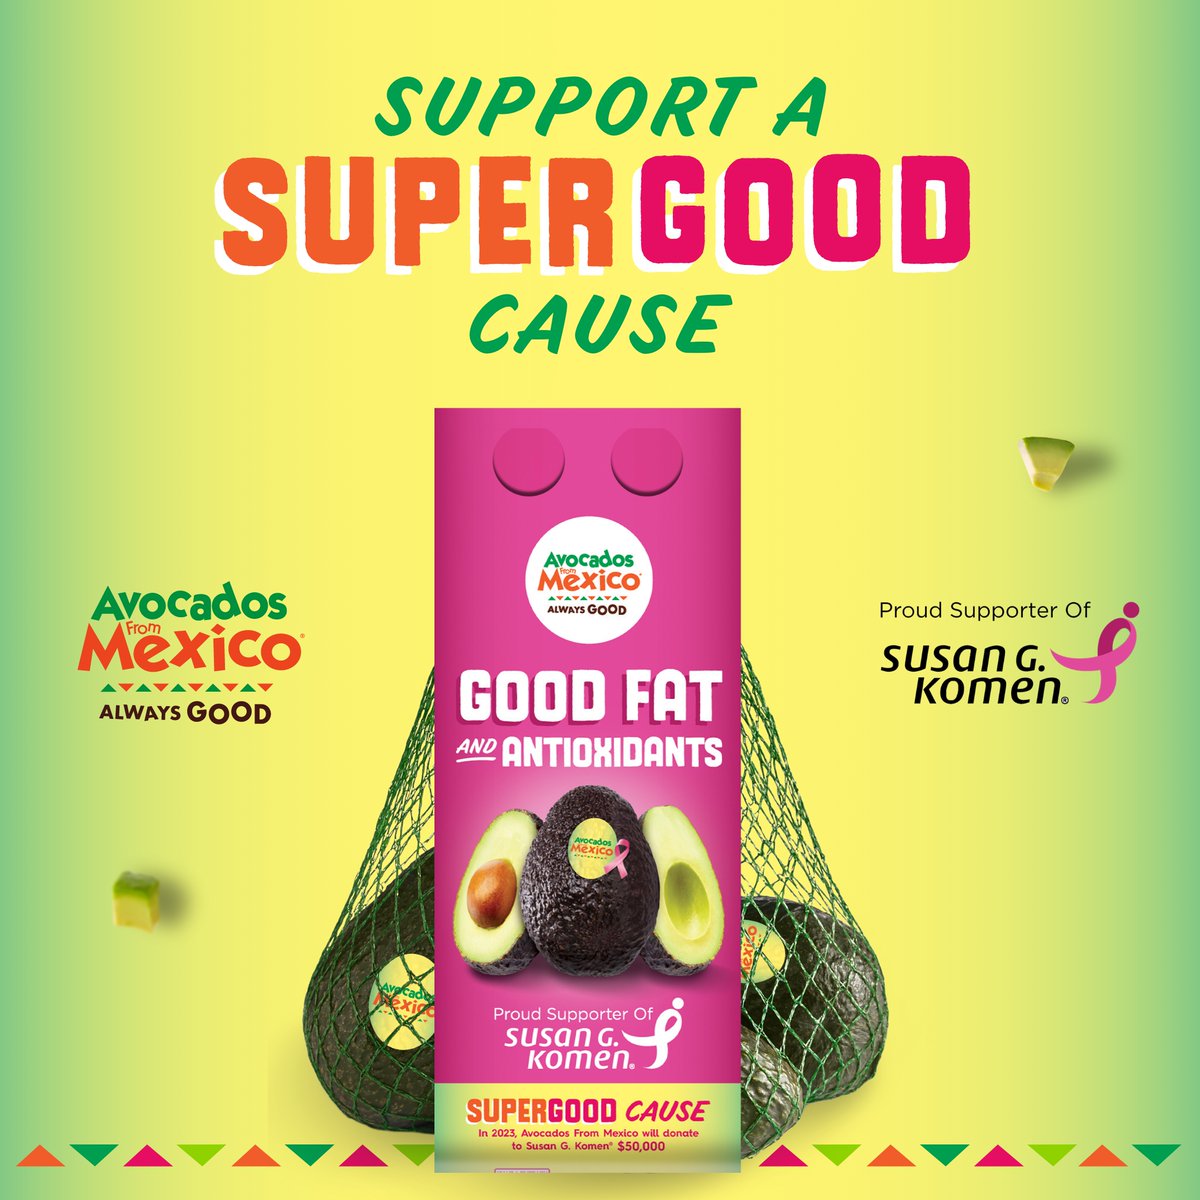 Bring in the harvest season with this salad bowl made with #SuperGood Avocados From Mexico® in the pink bag. For #BreastCancerAwarenessMonth, we are donating $50,000 to Susan G. Komen® to help in their mission to end breast cancer. #AvocadoGoodFats

🔗:bit.ly/3s6UUcj